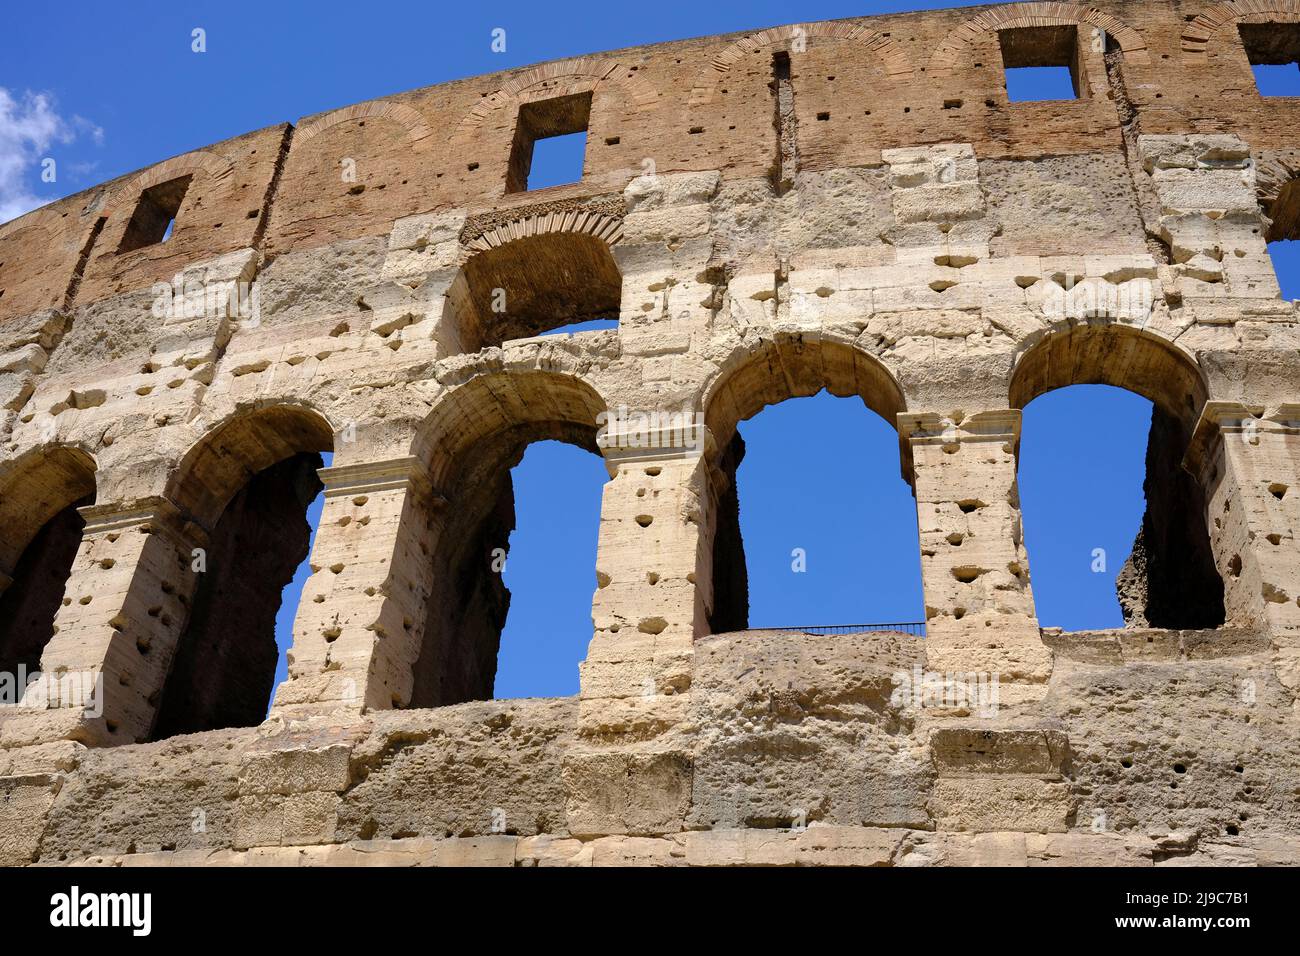 Exterior of the Roman Colosseum in Rome, Italy Stock Photo